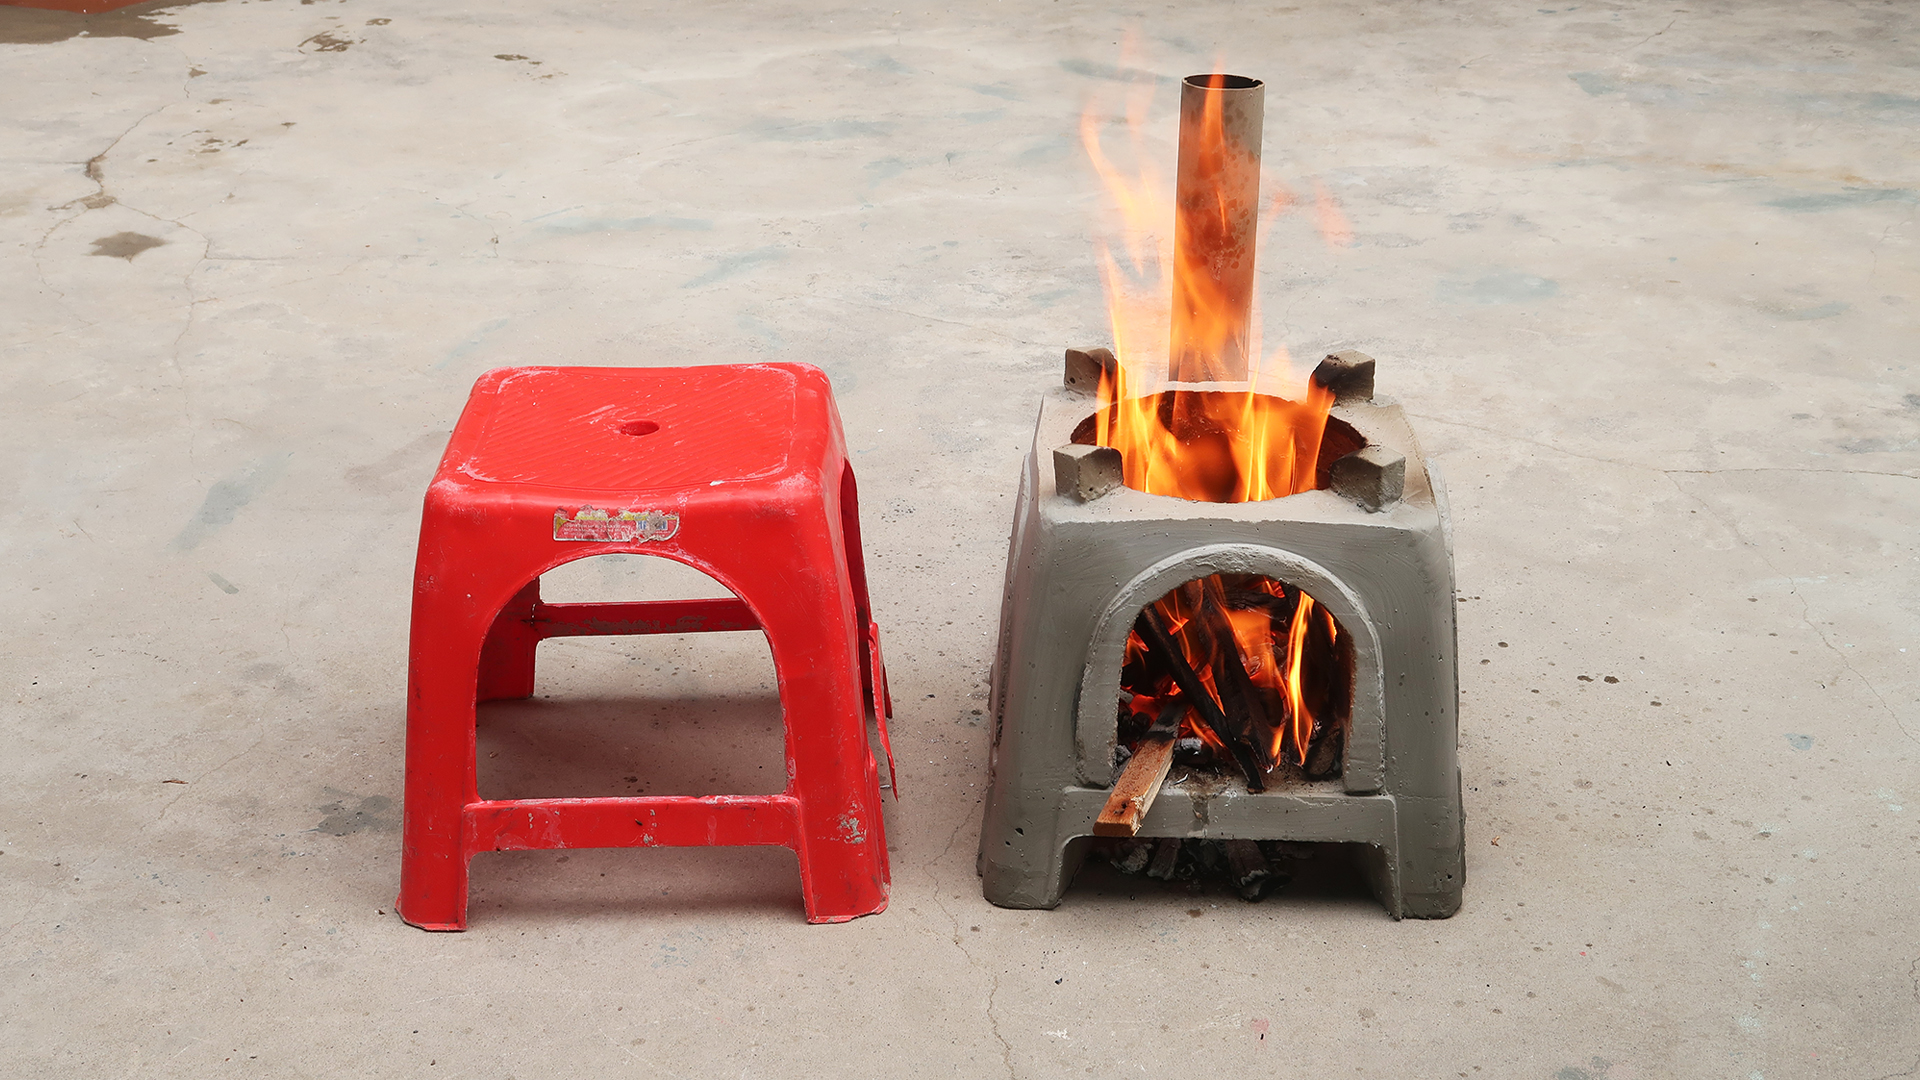 The Idea Of Building A Wood Stove From Cement And Discarded Plastic Chairs